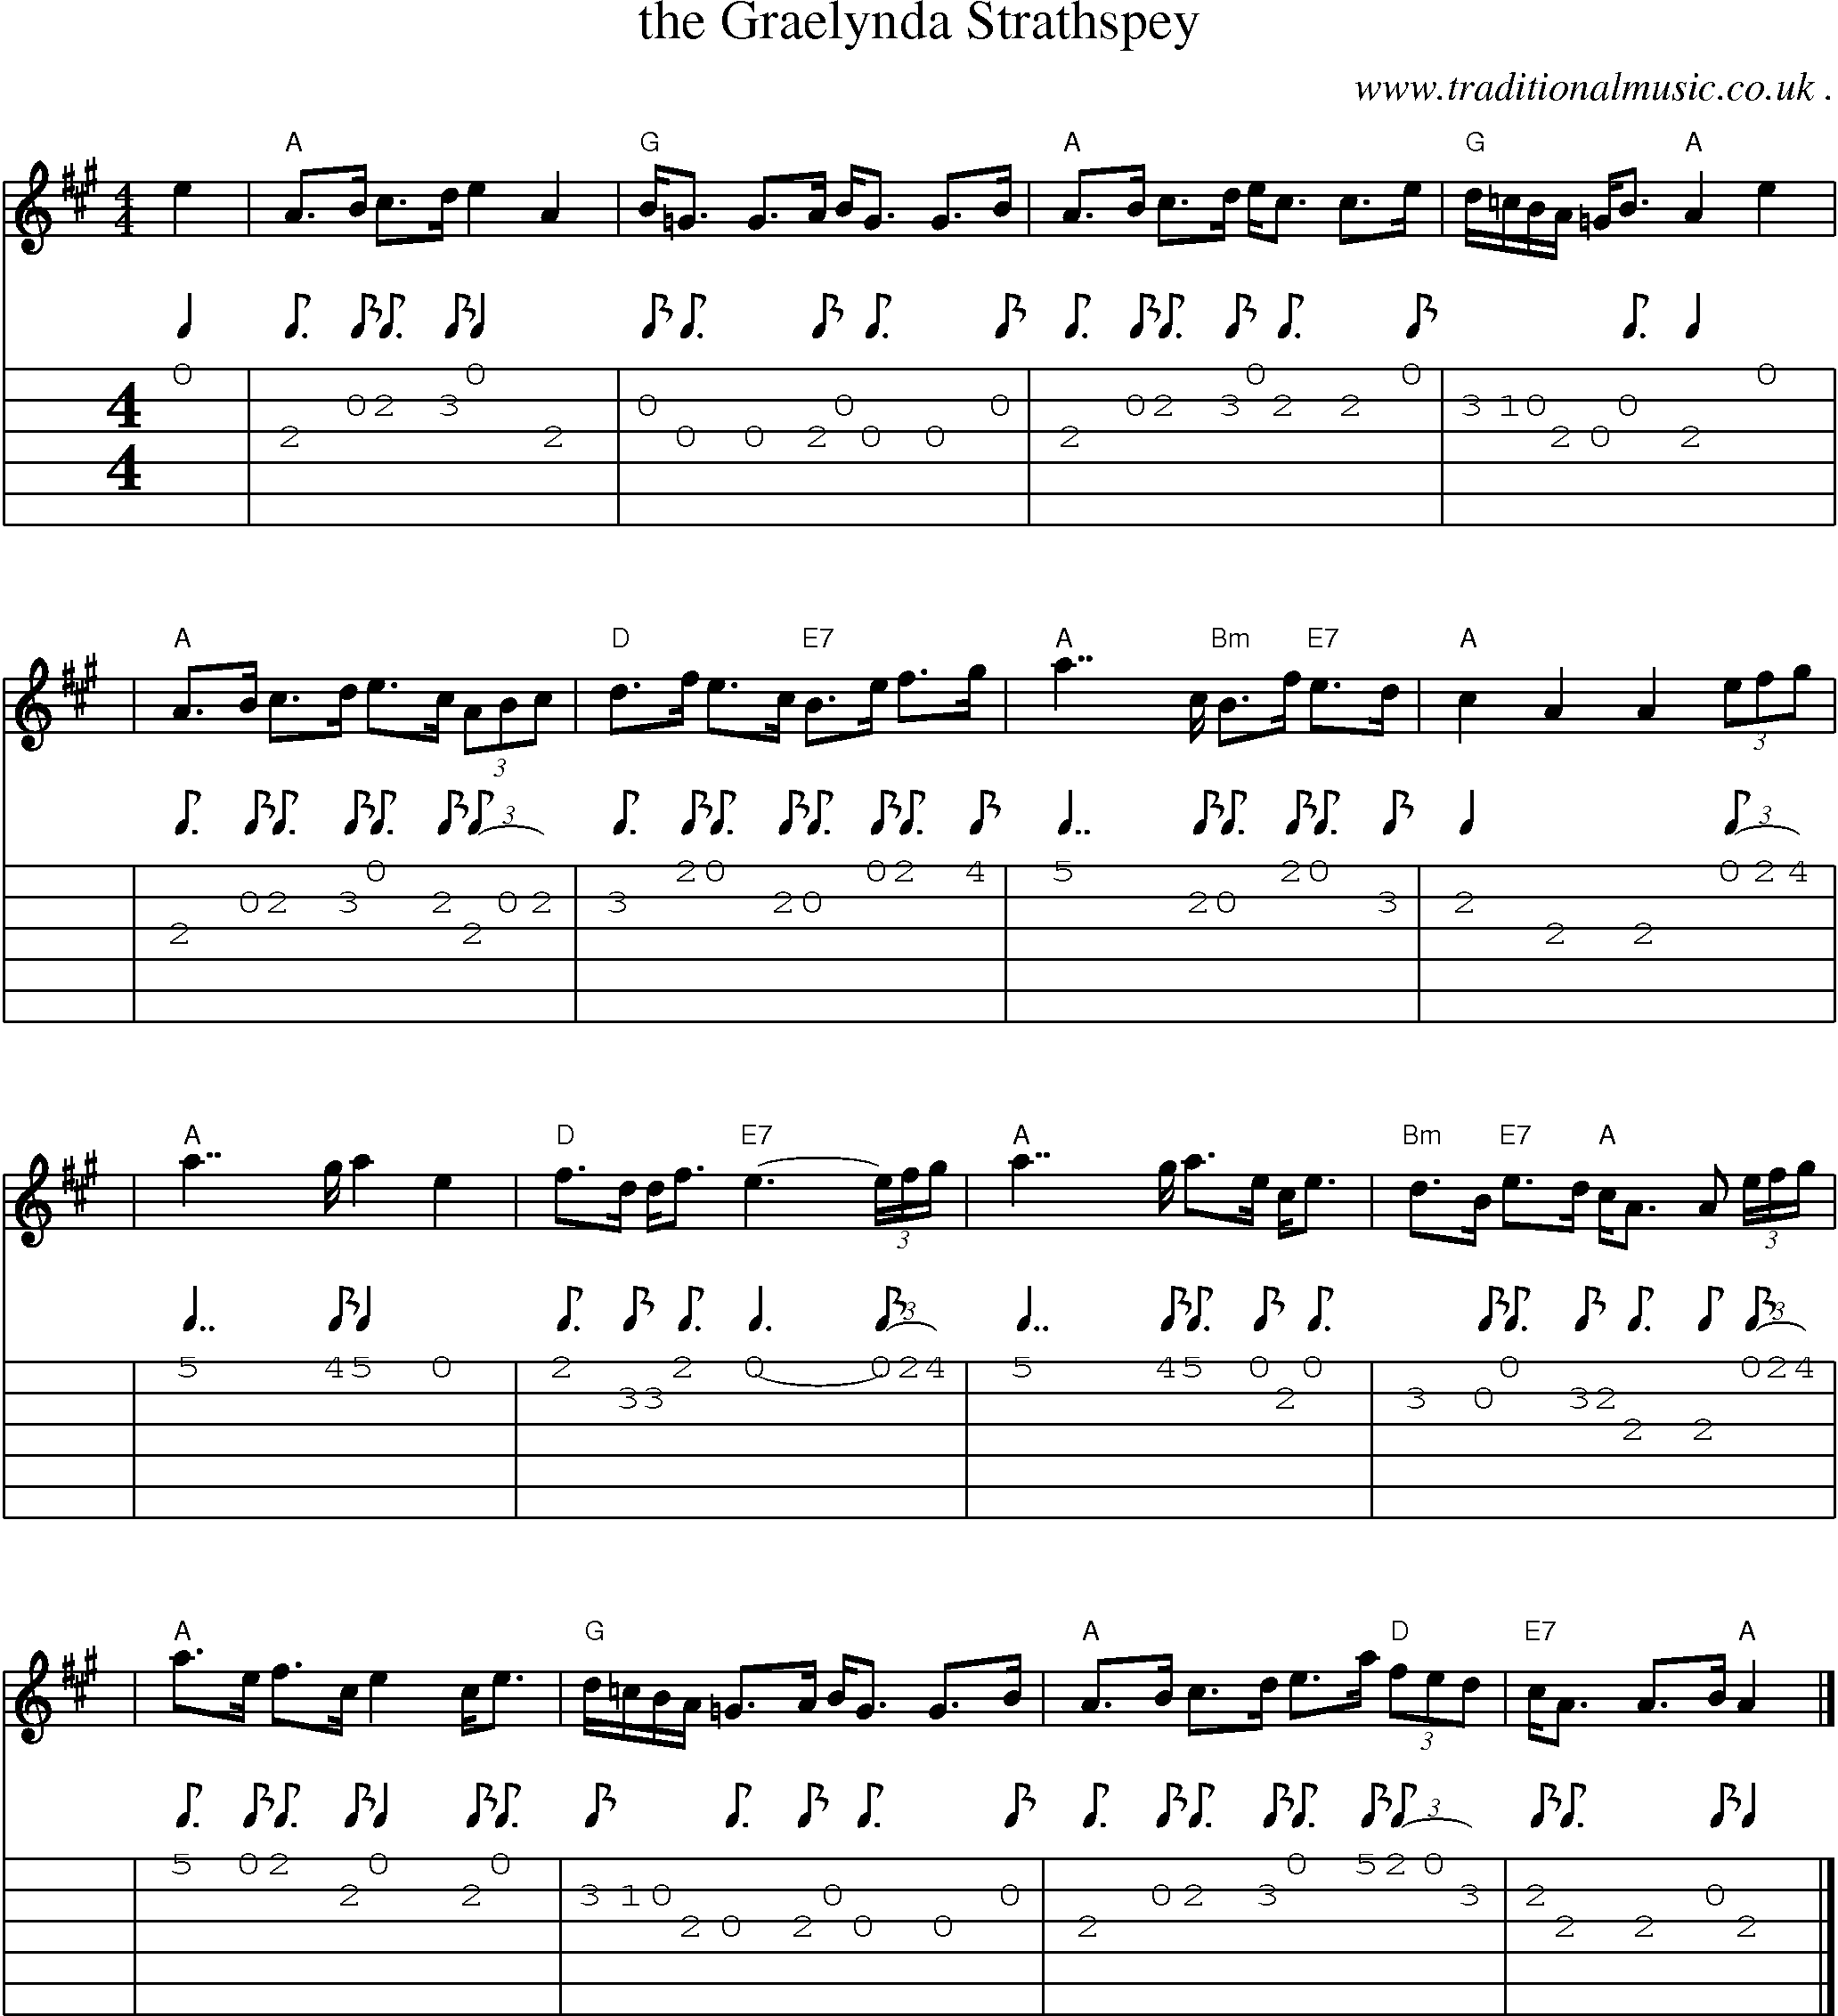 Sheet-music  score, Chords and Guitar Tabs for The Graelynda Strathspey